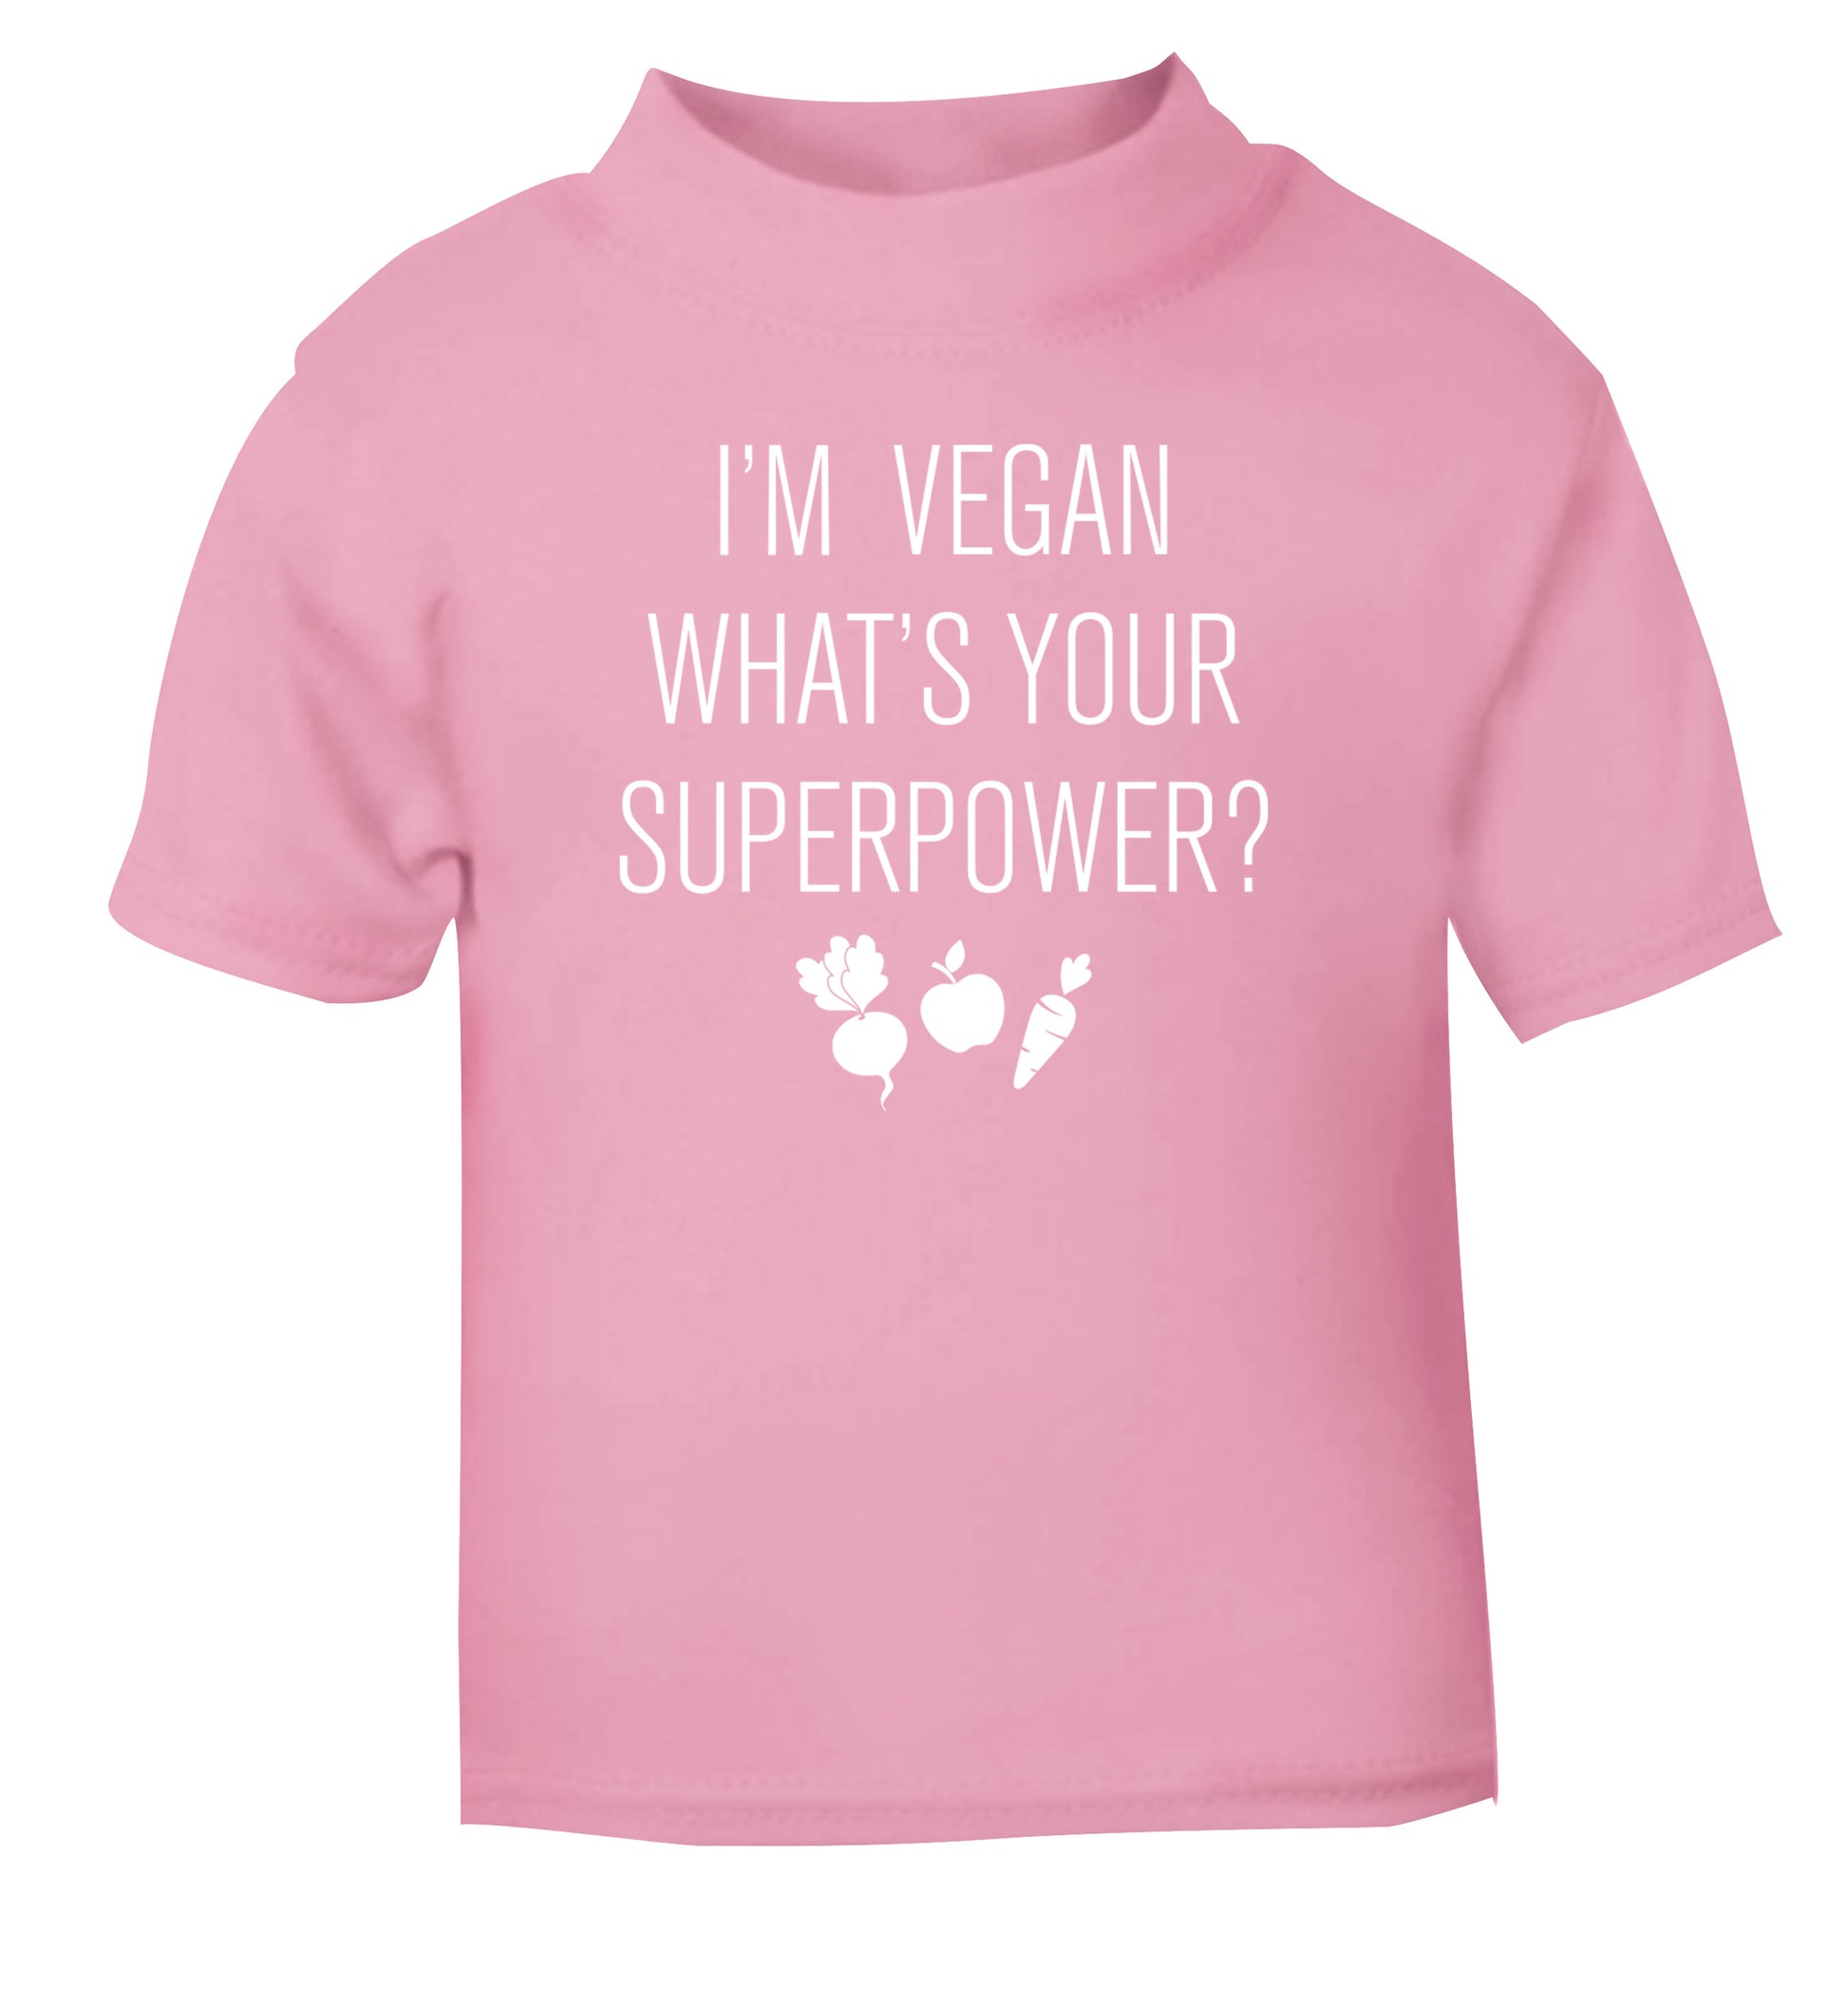 I'm Vegan What's Your Superpower? light pink Baby Toddler Tshirt 2 Years